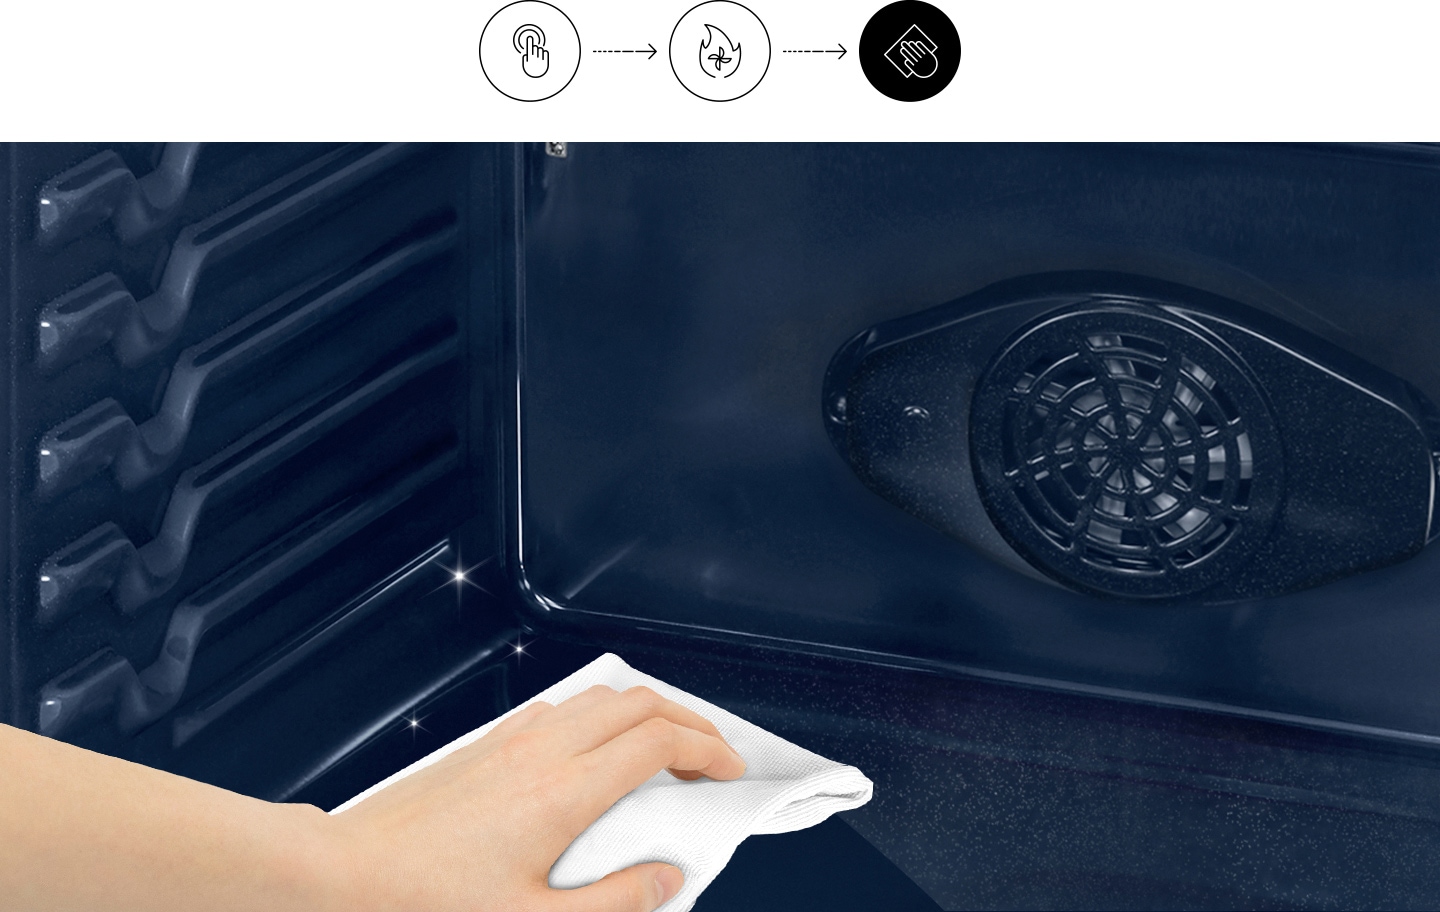 Easily keep the oven clean & grease free